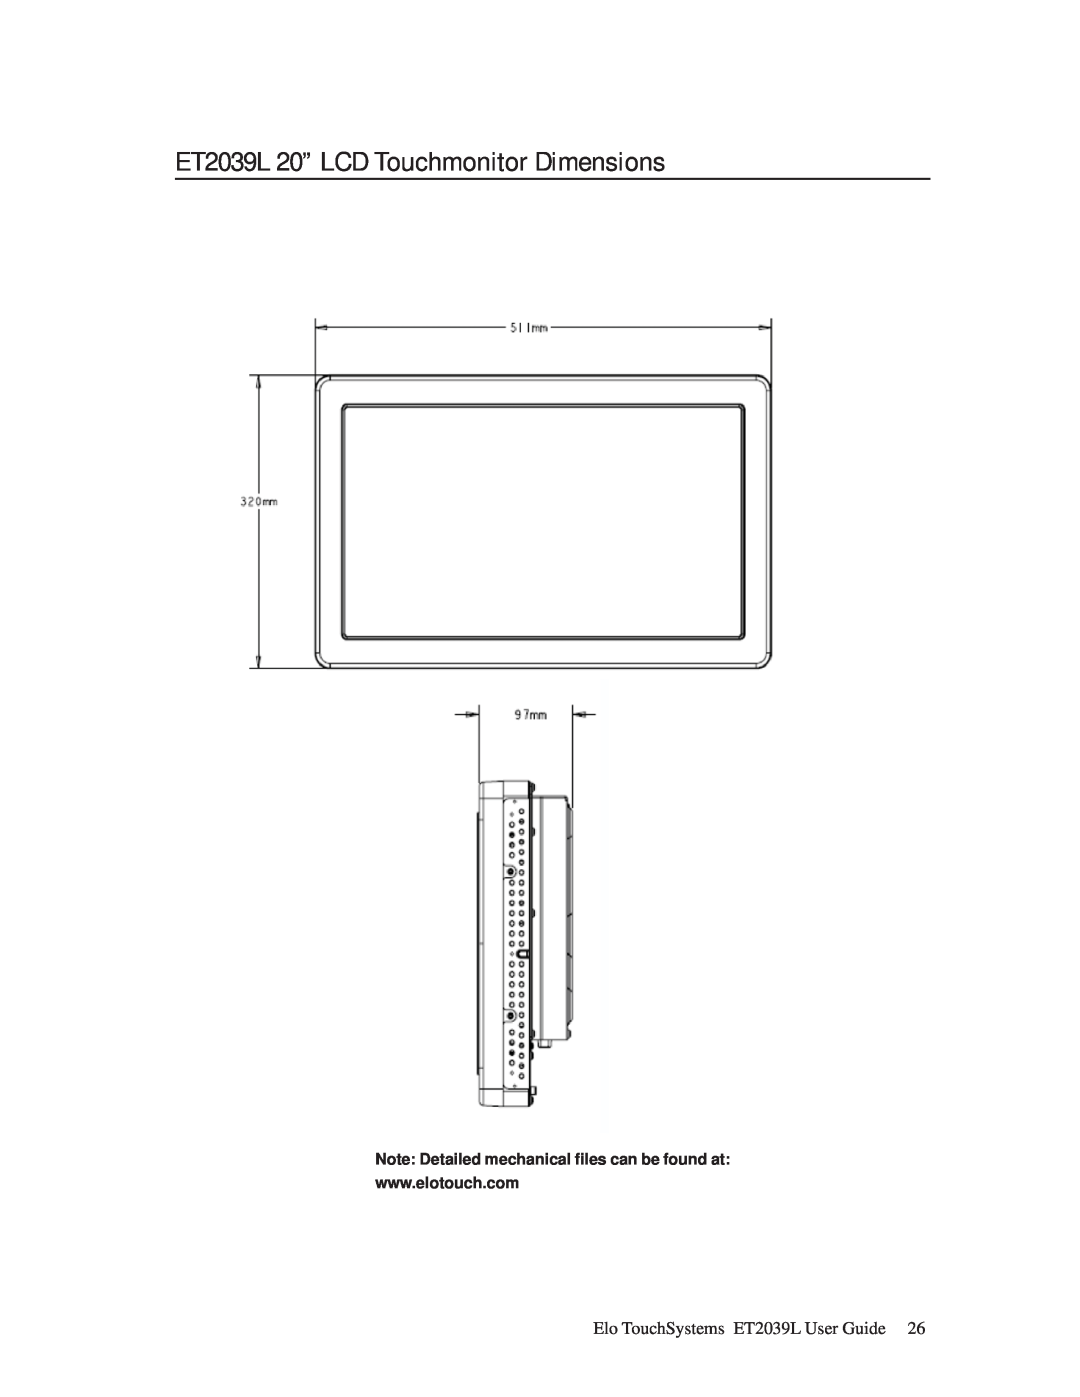 Elo TouchSystems manual ET2039L 20” LCD Touchmonitor Dimensions, Elo TouchSystems ET2039L User Guide 